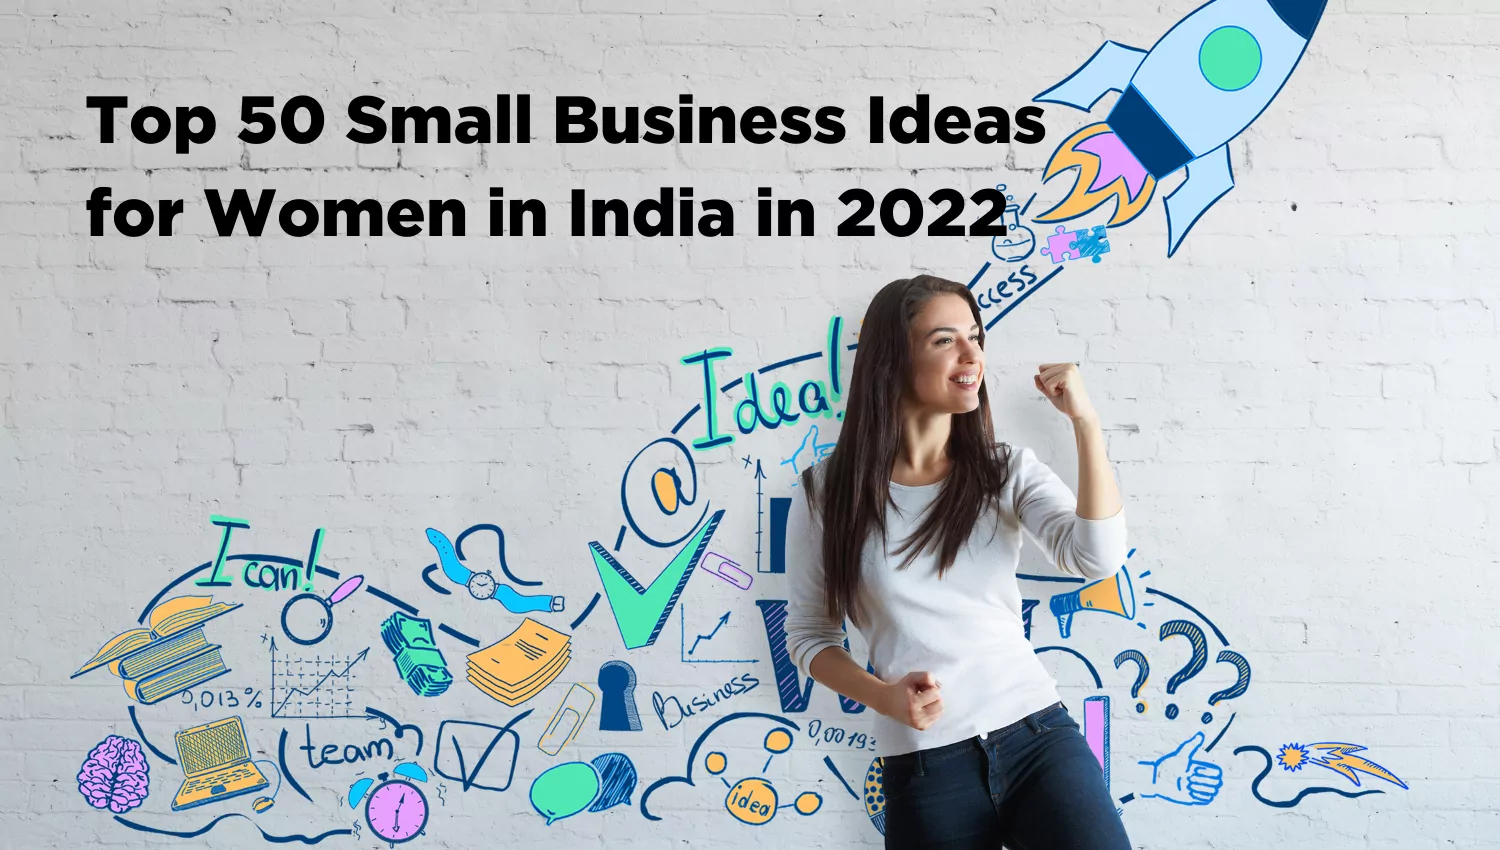 Top 50 Small Business Ideas for Women in India in 2022